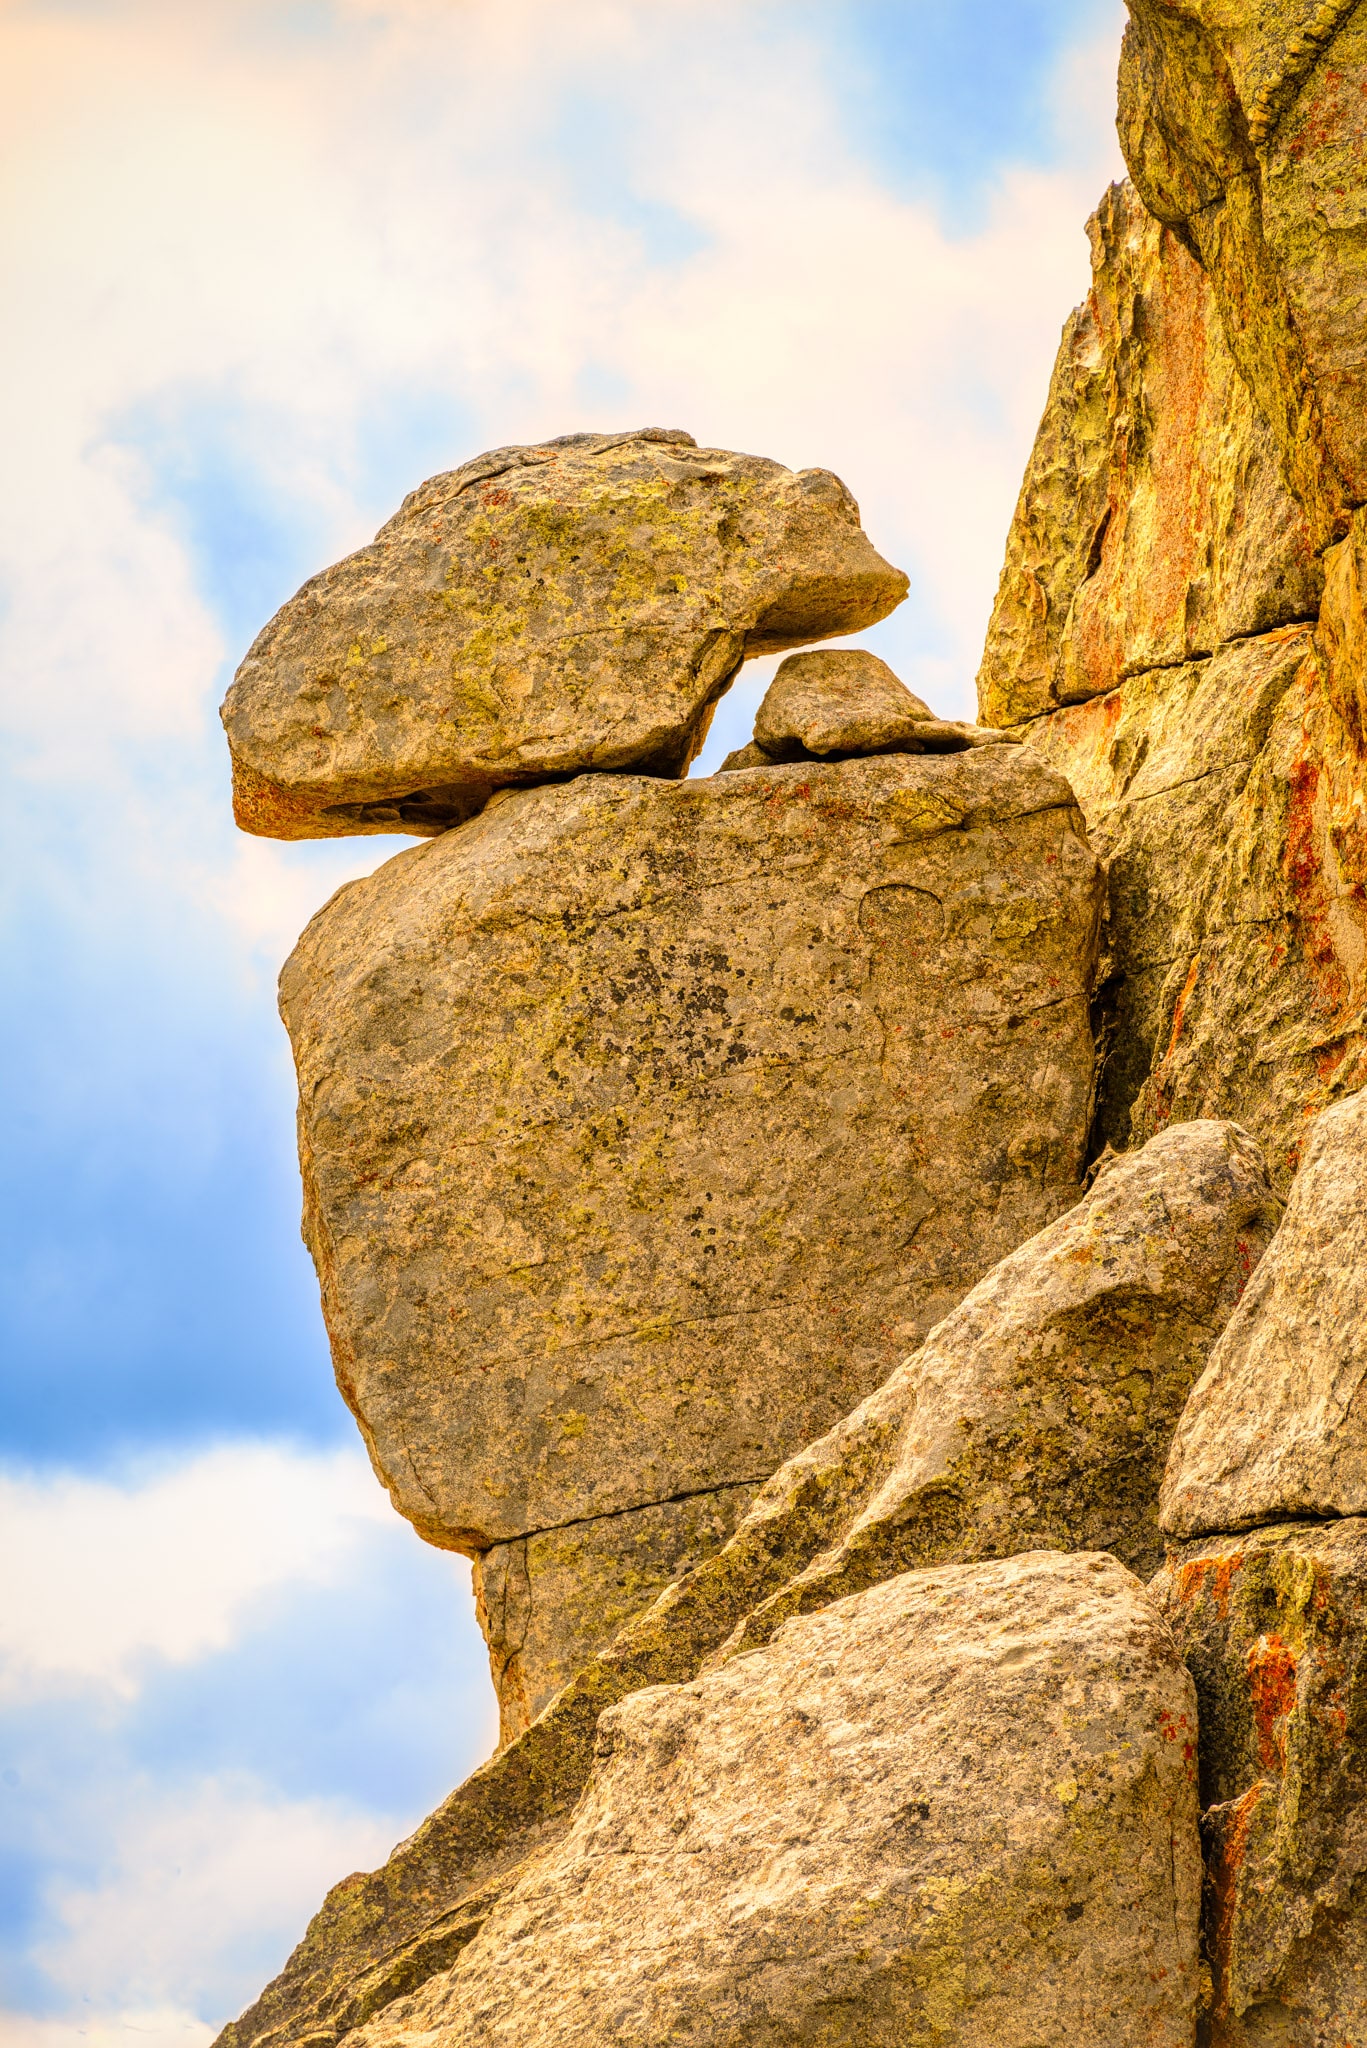 A close-up of the King of the Throne rock formation in City of Rocks National Reserve near Almo, Idaho.